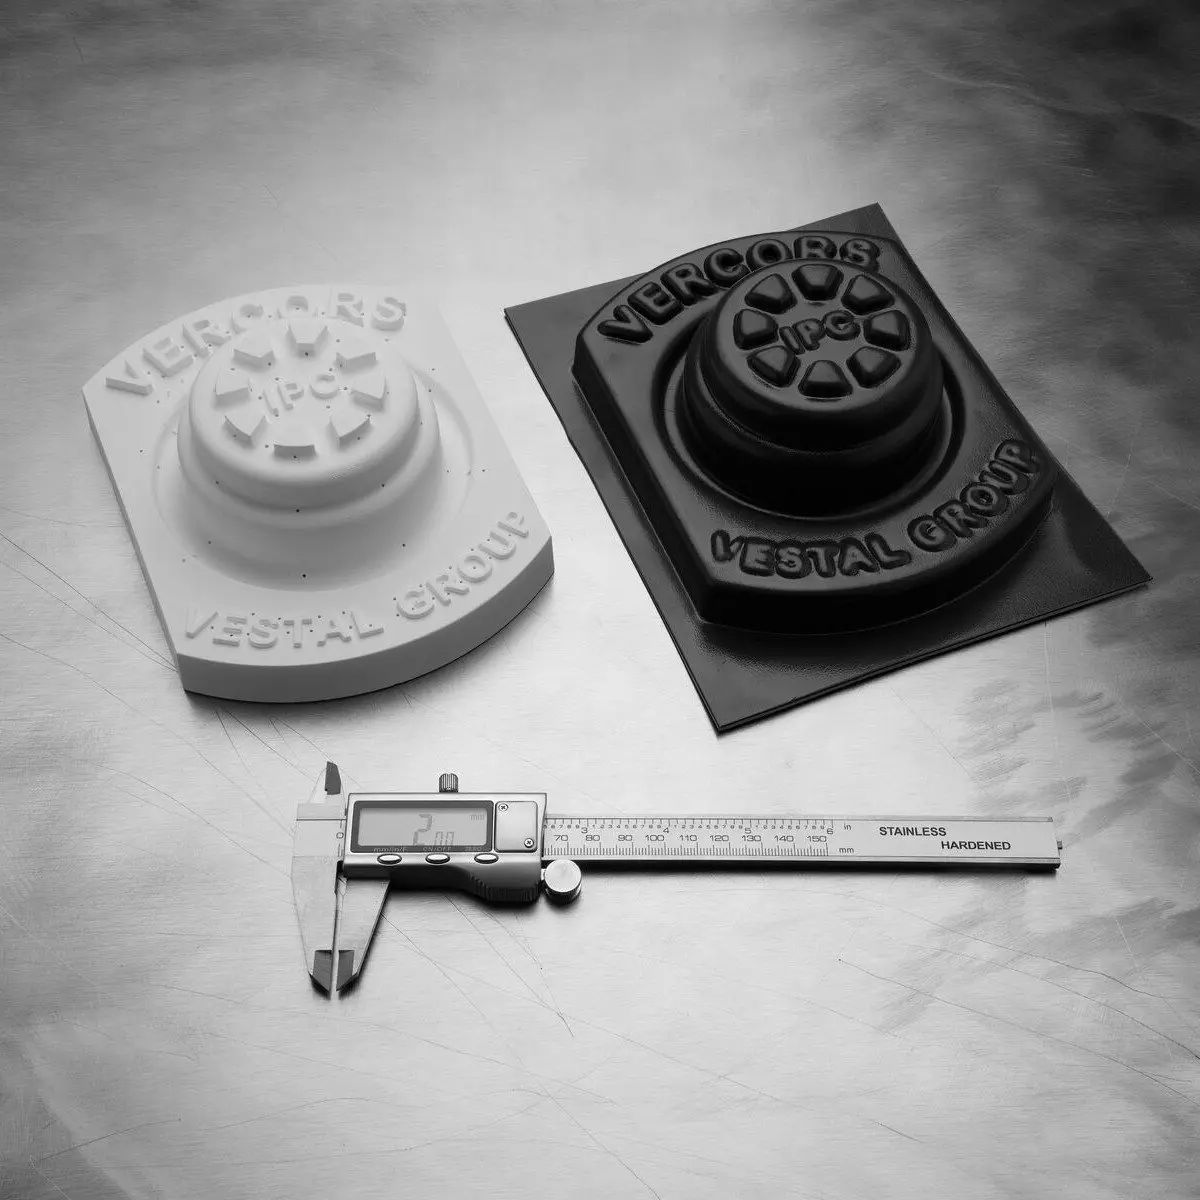 vestal group thermoforming 3d printed mold and thermoformed part